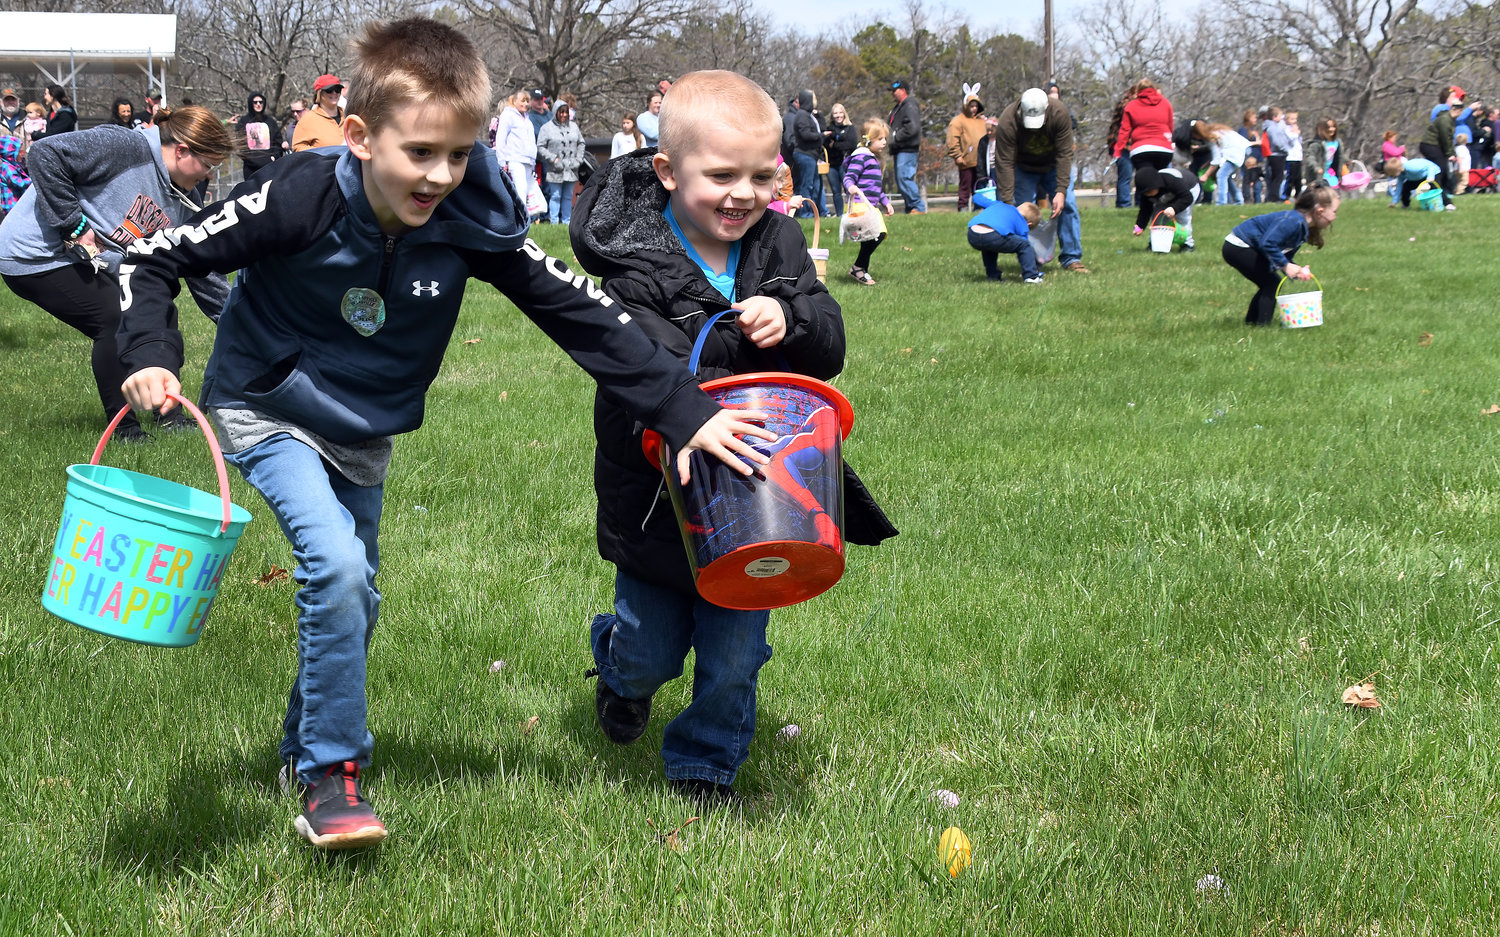 Volunteers filled 10,000 plastic eggs for the event which appears to have sparked some competition (left) as one egg hunter shields another from the group of eggs in front of them.